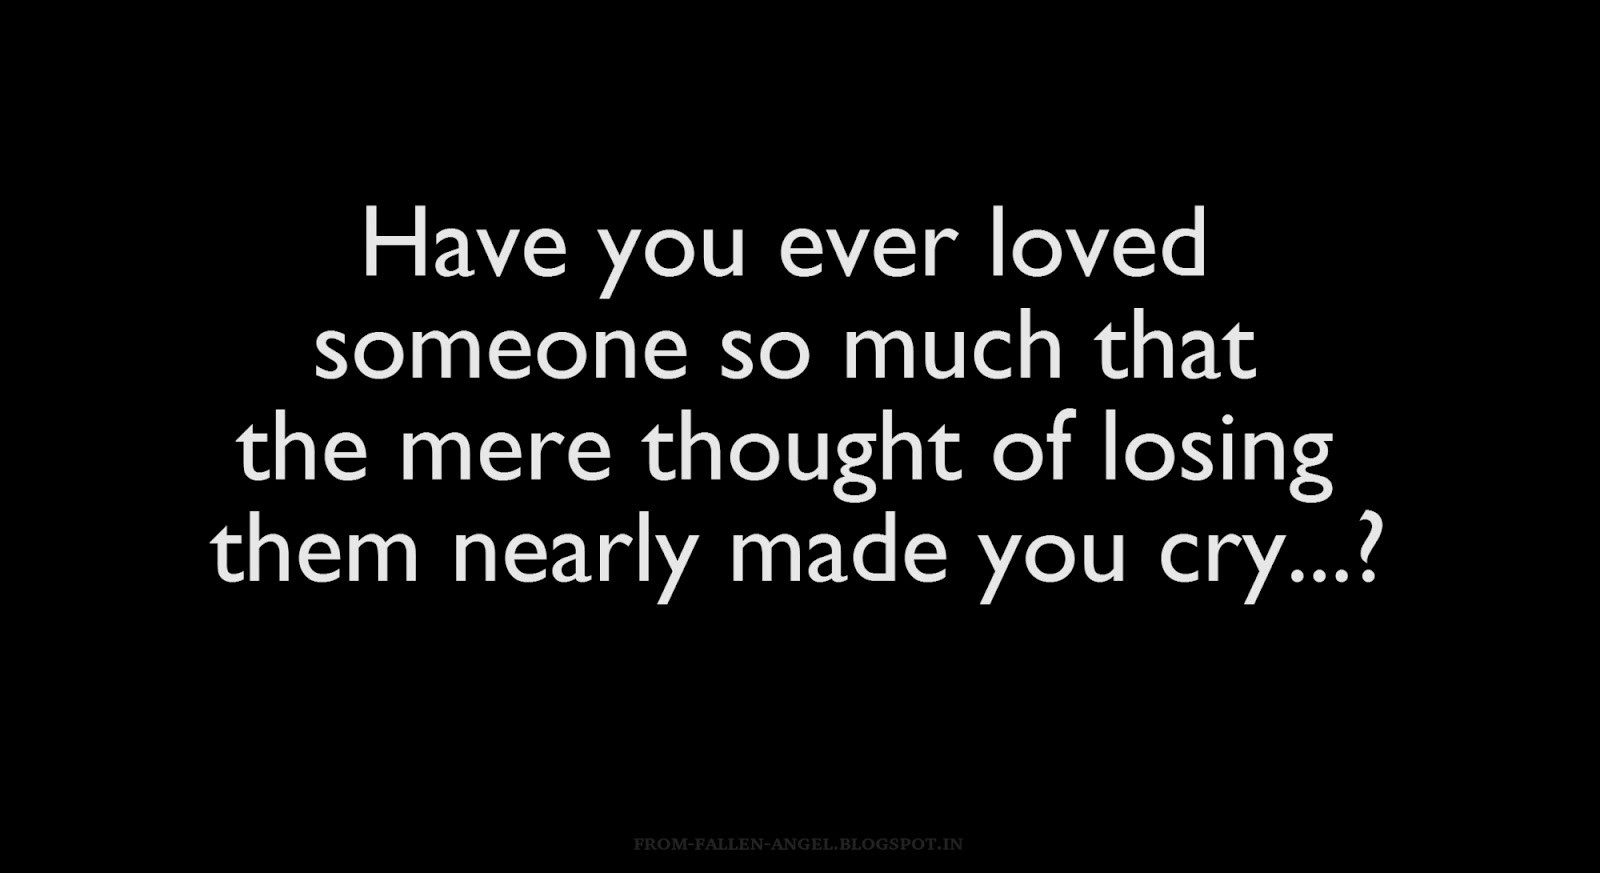 Have You Ever Loved Someone So Much Quotes
 Fallen Angel 04 25 14